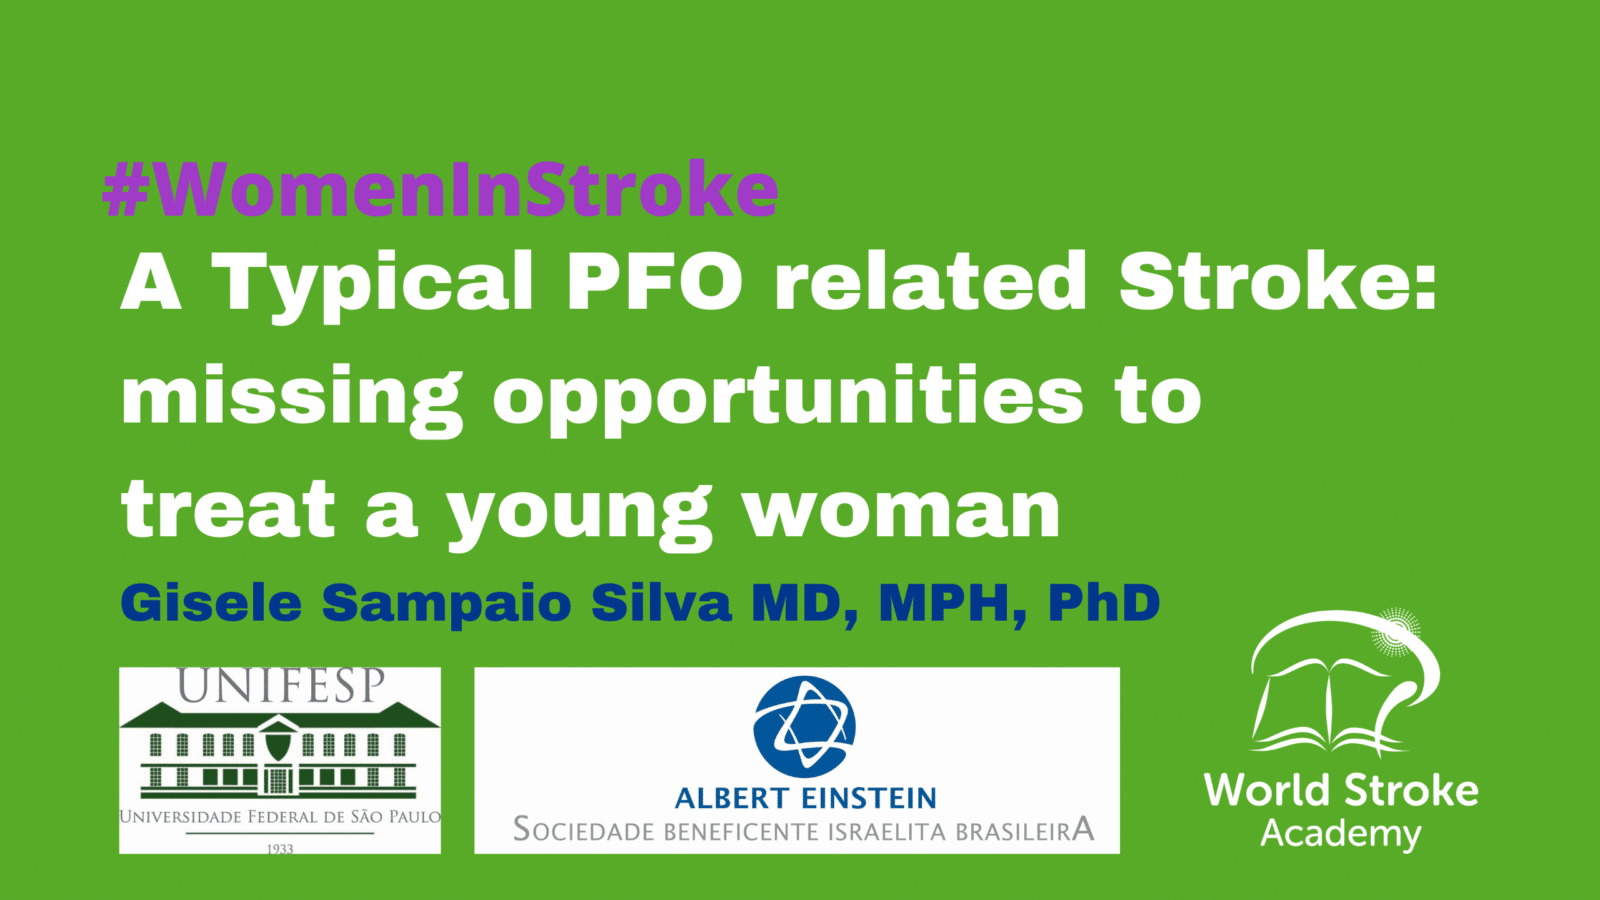 Case Study – A Typical PFO related Stroke: missing opportunities to treat a young woman